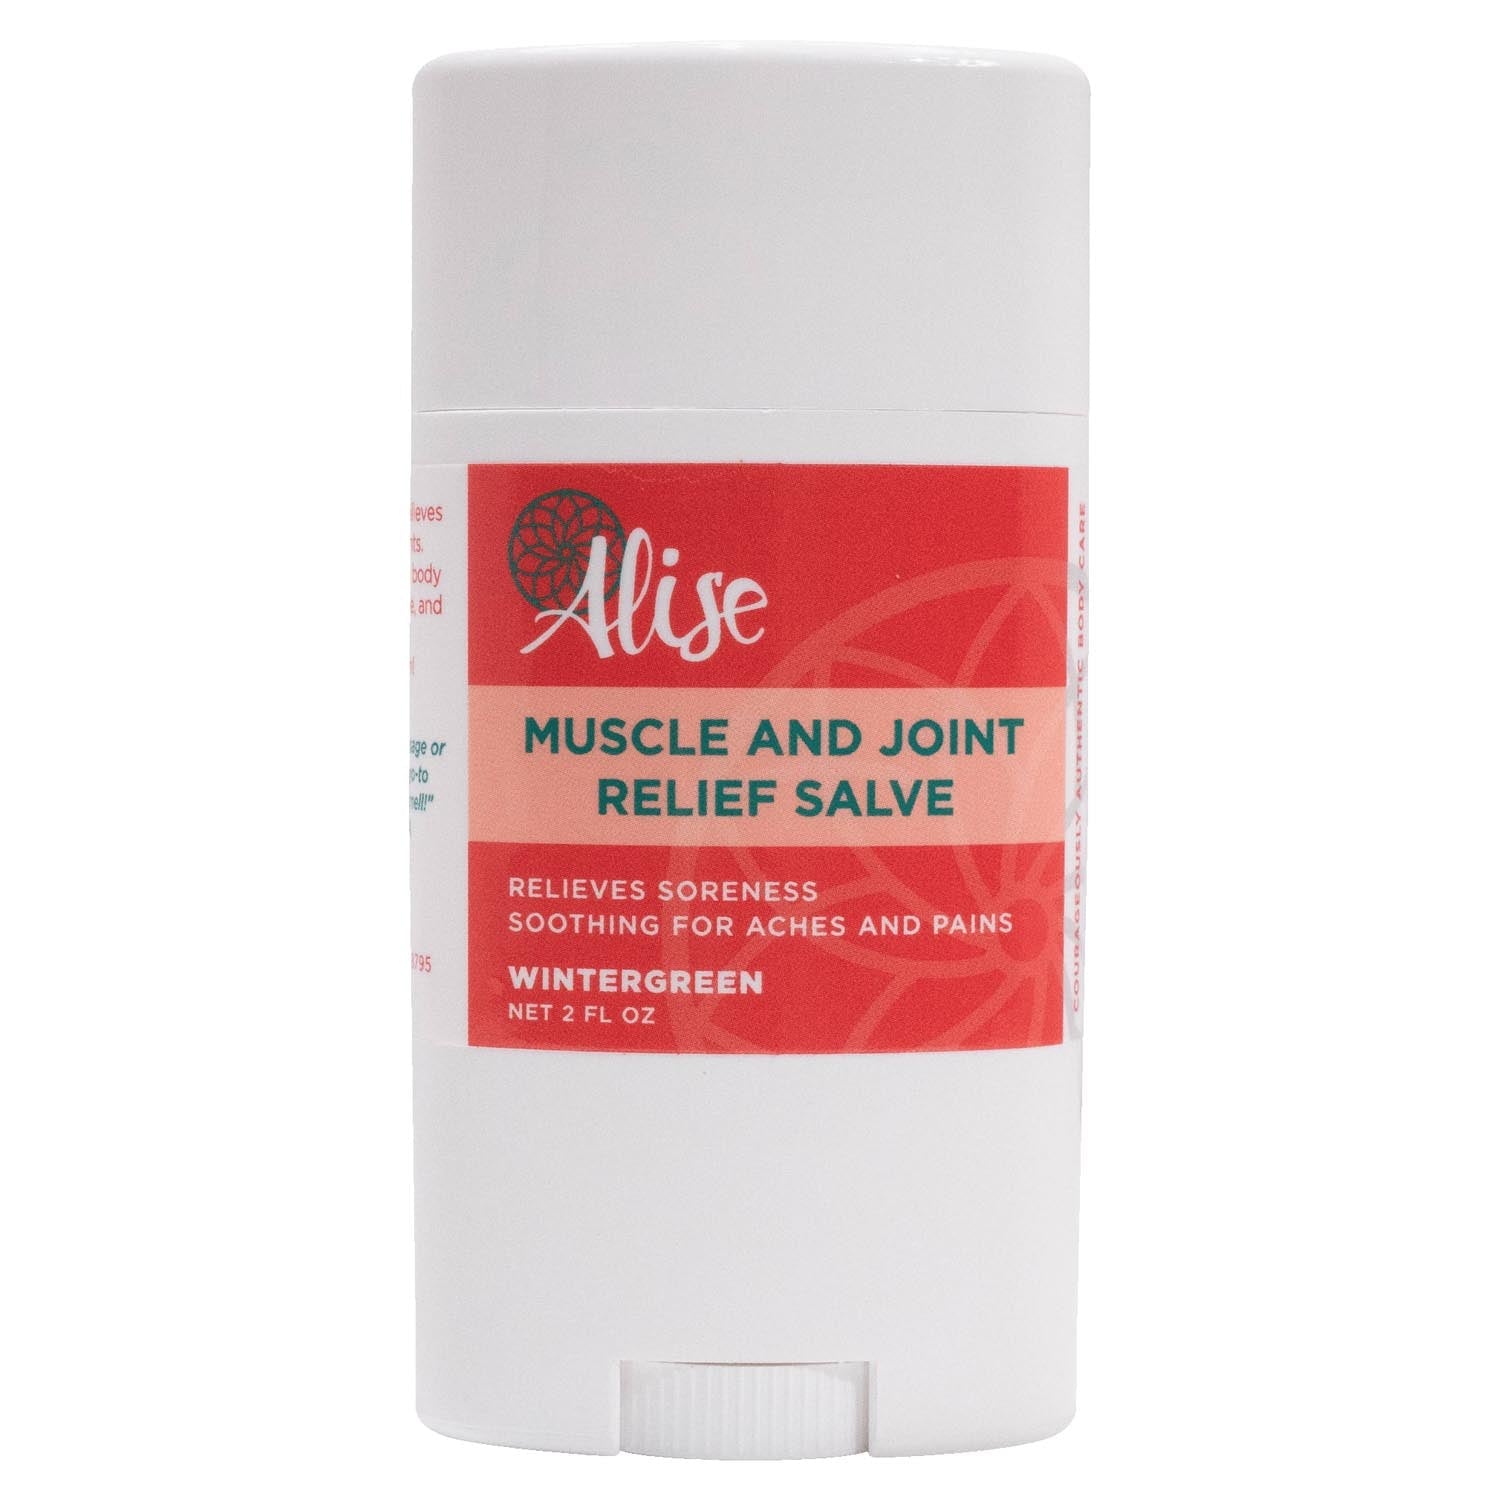 Muscle and Joint Relief Salve Wintergreen 2oz Rub On handcrafted by Alise Body Care